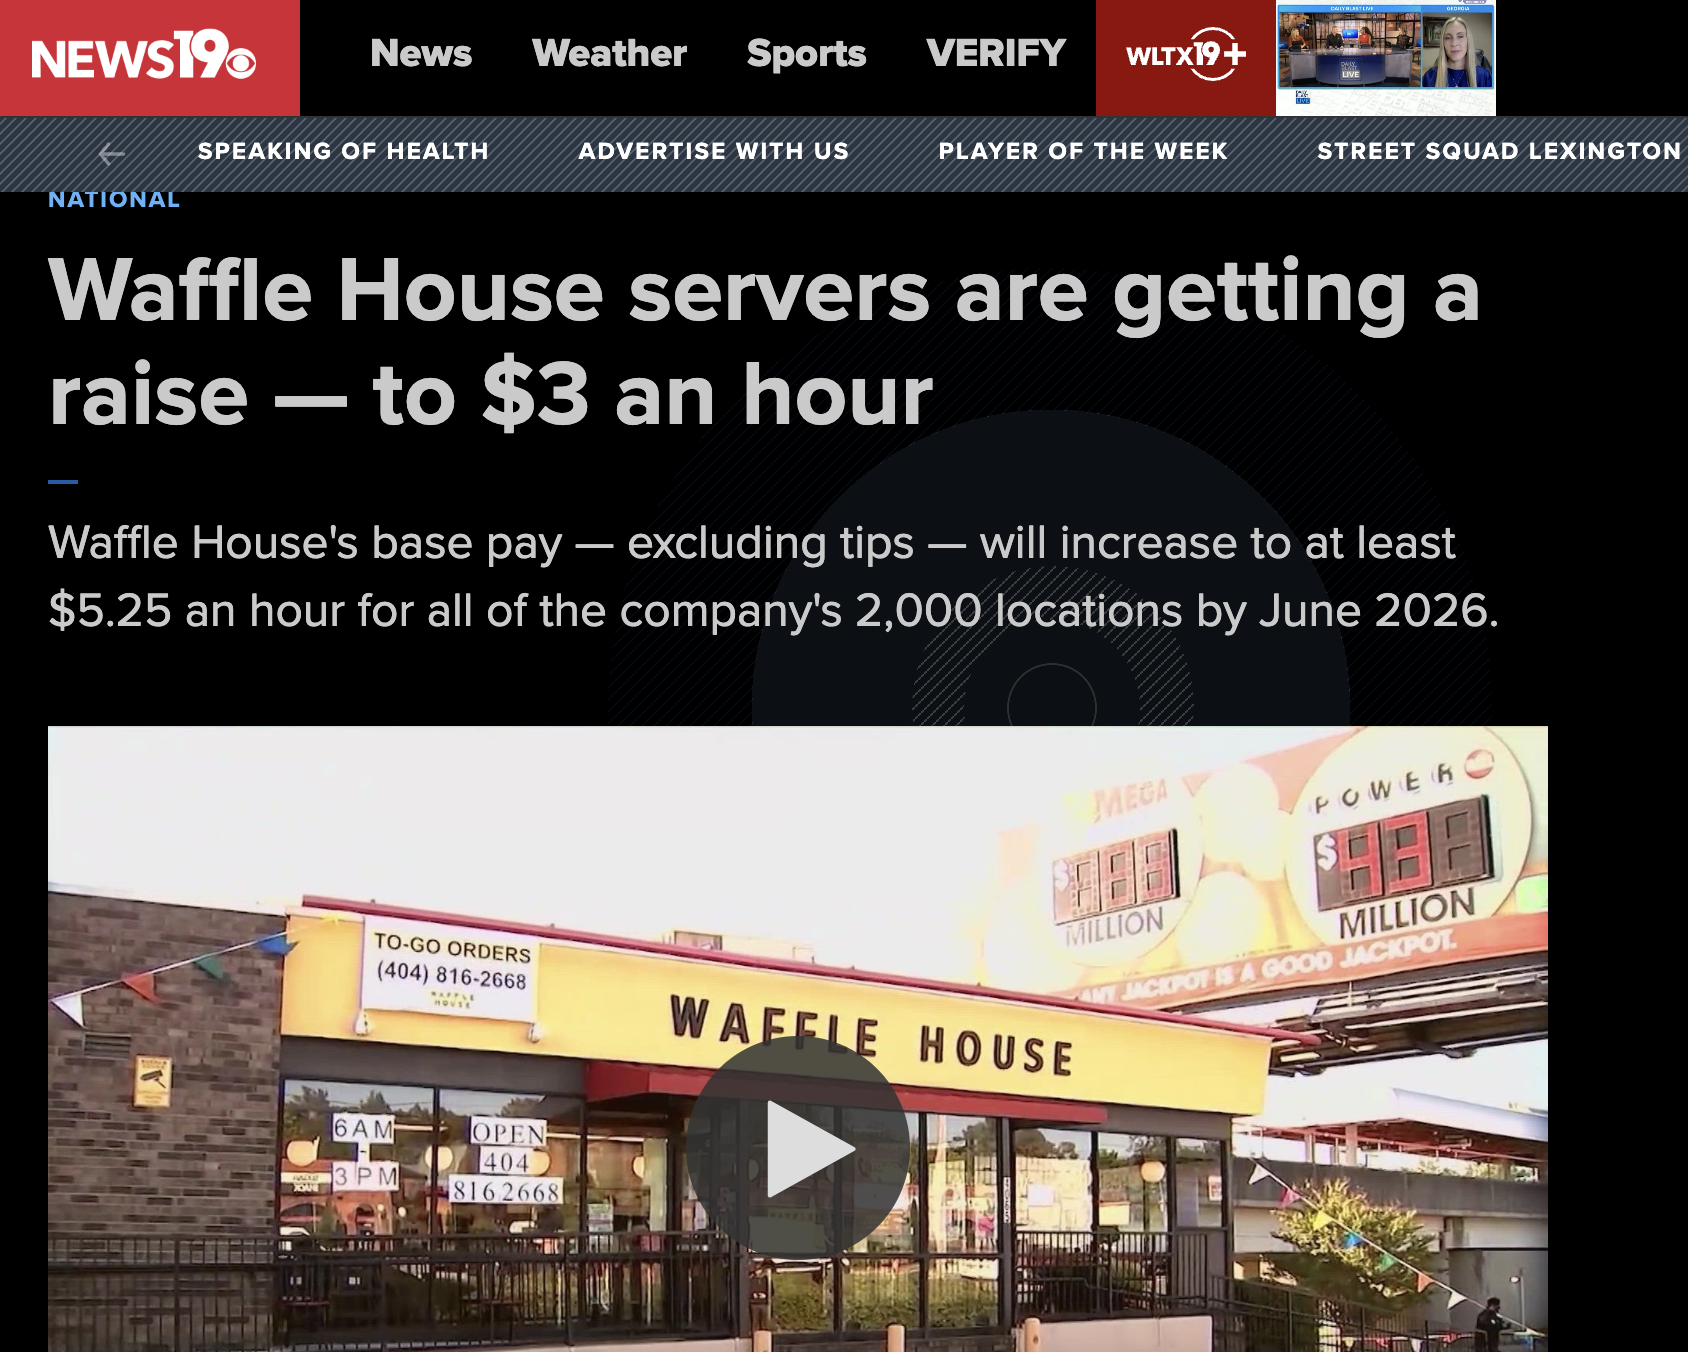 screenshot - NEWS19 News Weather Sports Verify WLTX19 Speaking Of Health Advertise With Us Player Of The Week Street Squad Lexington National Waffle House servers are getting a raise to $3 an hour Waffle House's base pay excluding tips will increase to at